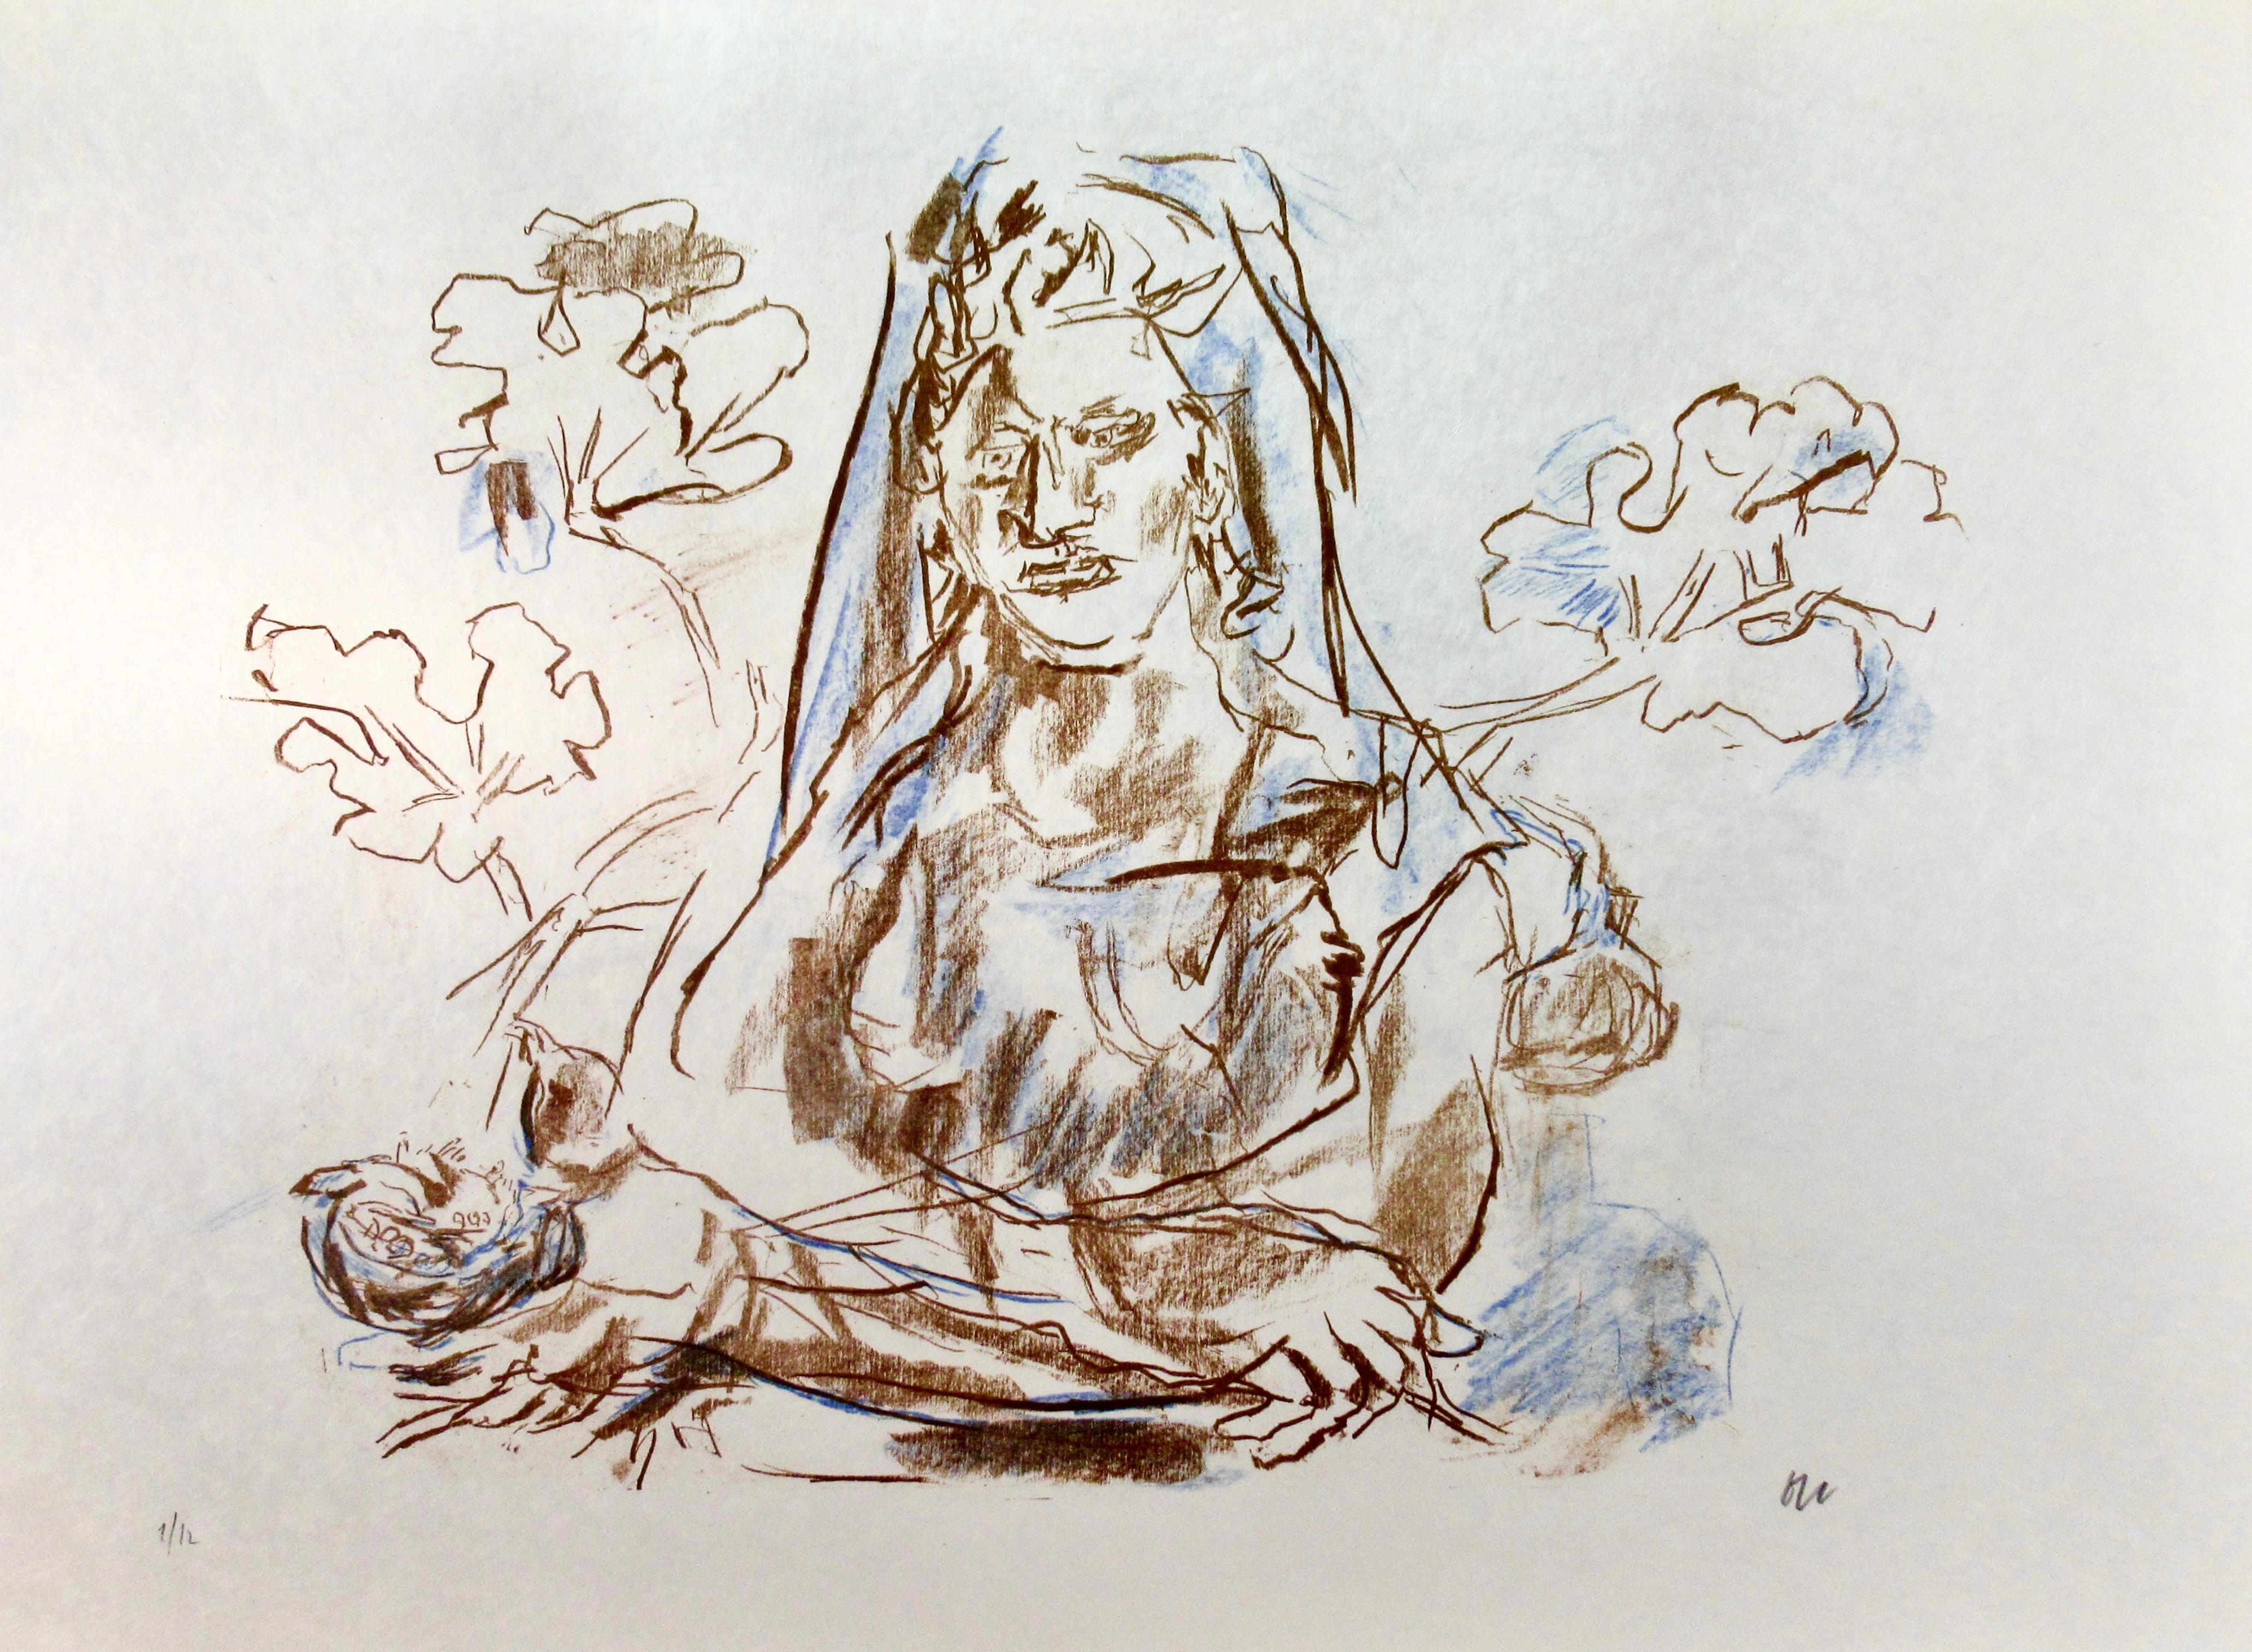 What was Oskar Kokoschka trying to capture in his portraits?